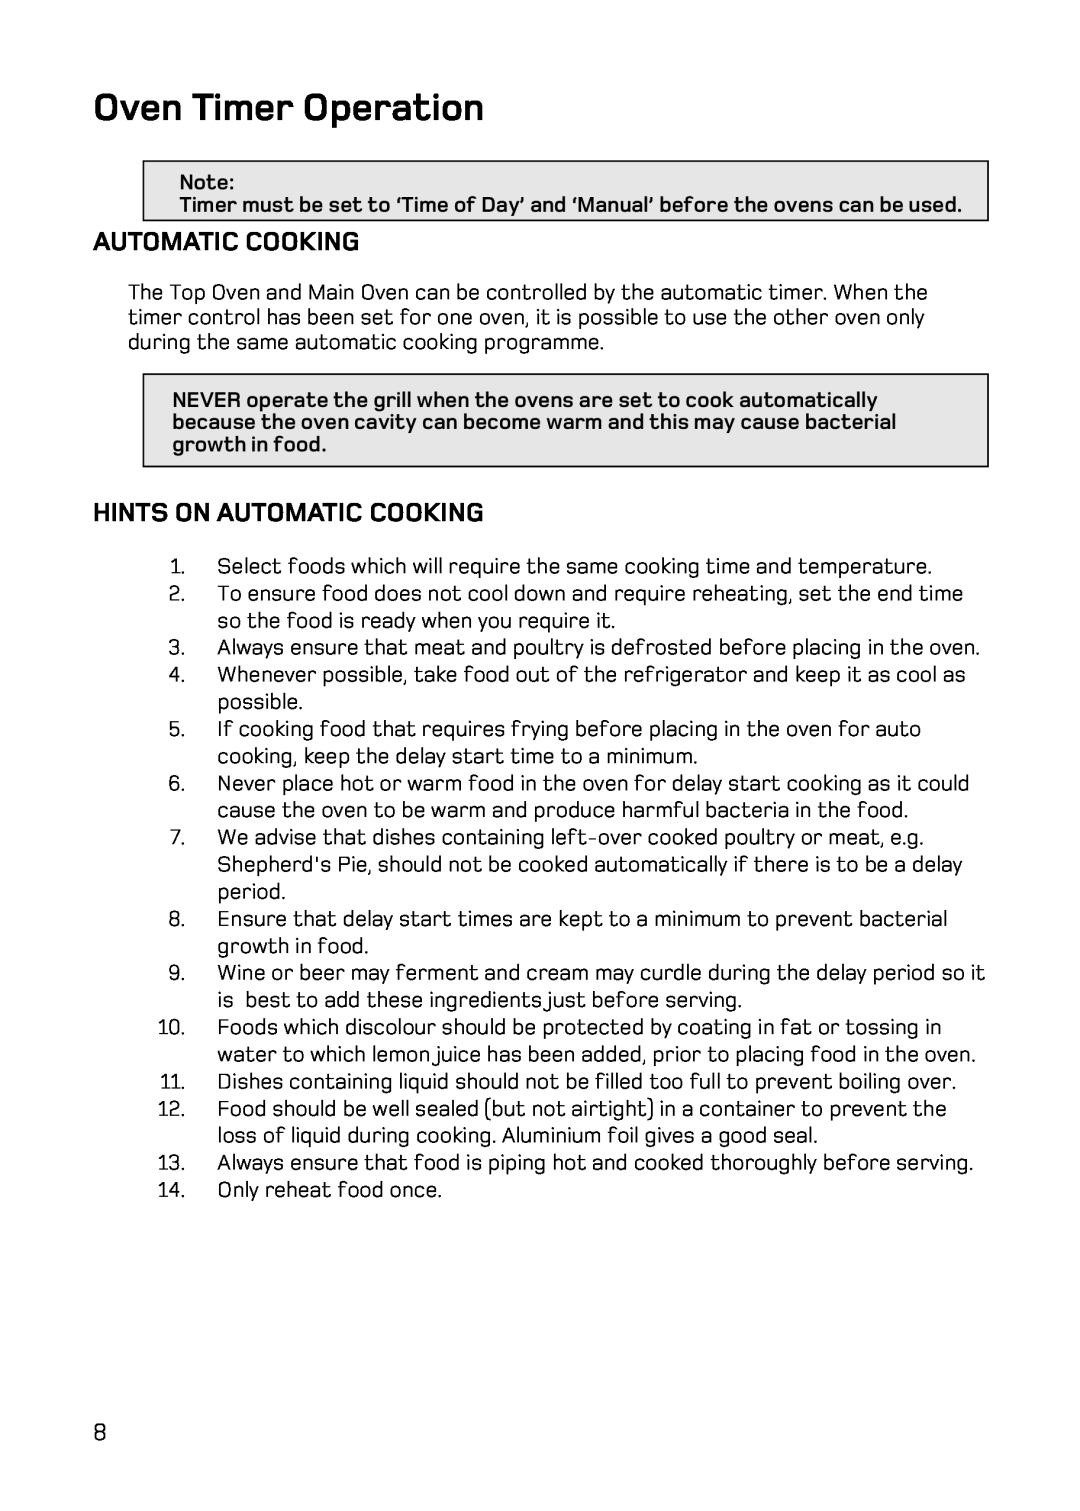 Hotpoint UQ47, UE47 manual Oven Timer Operation, Hints On Automatic Cooking 